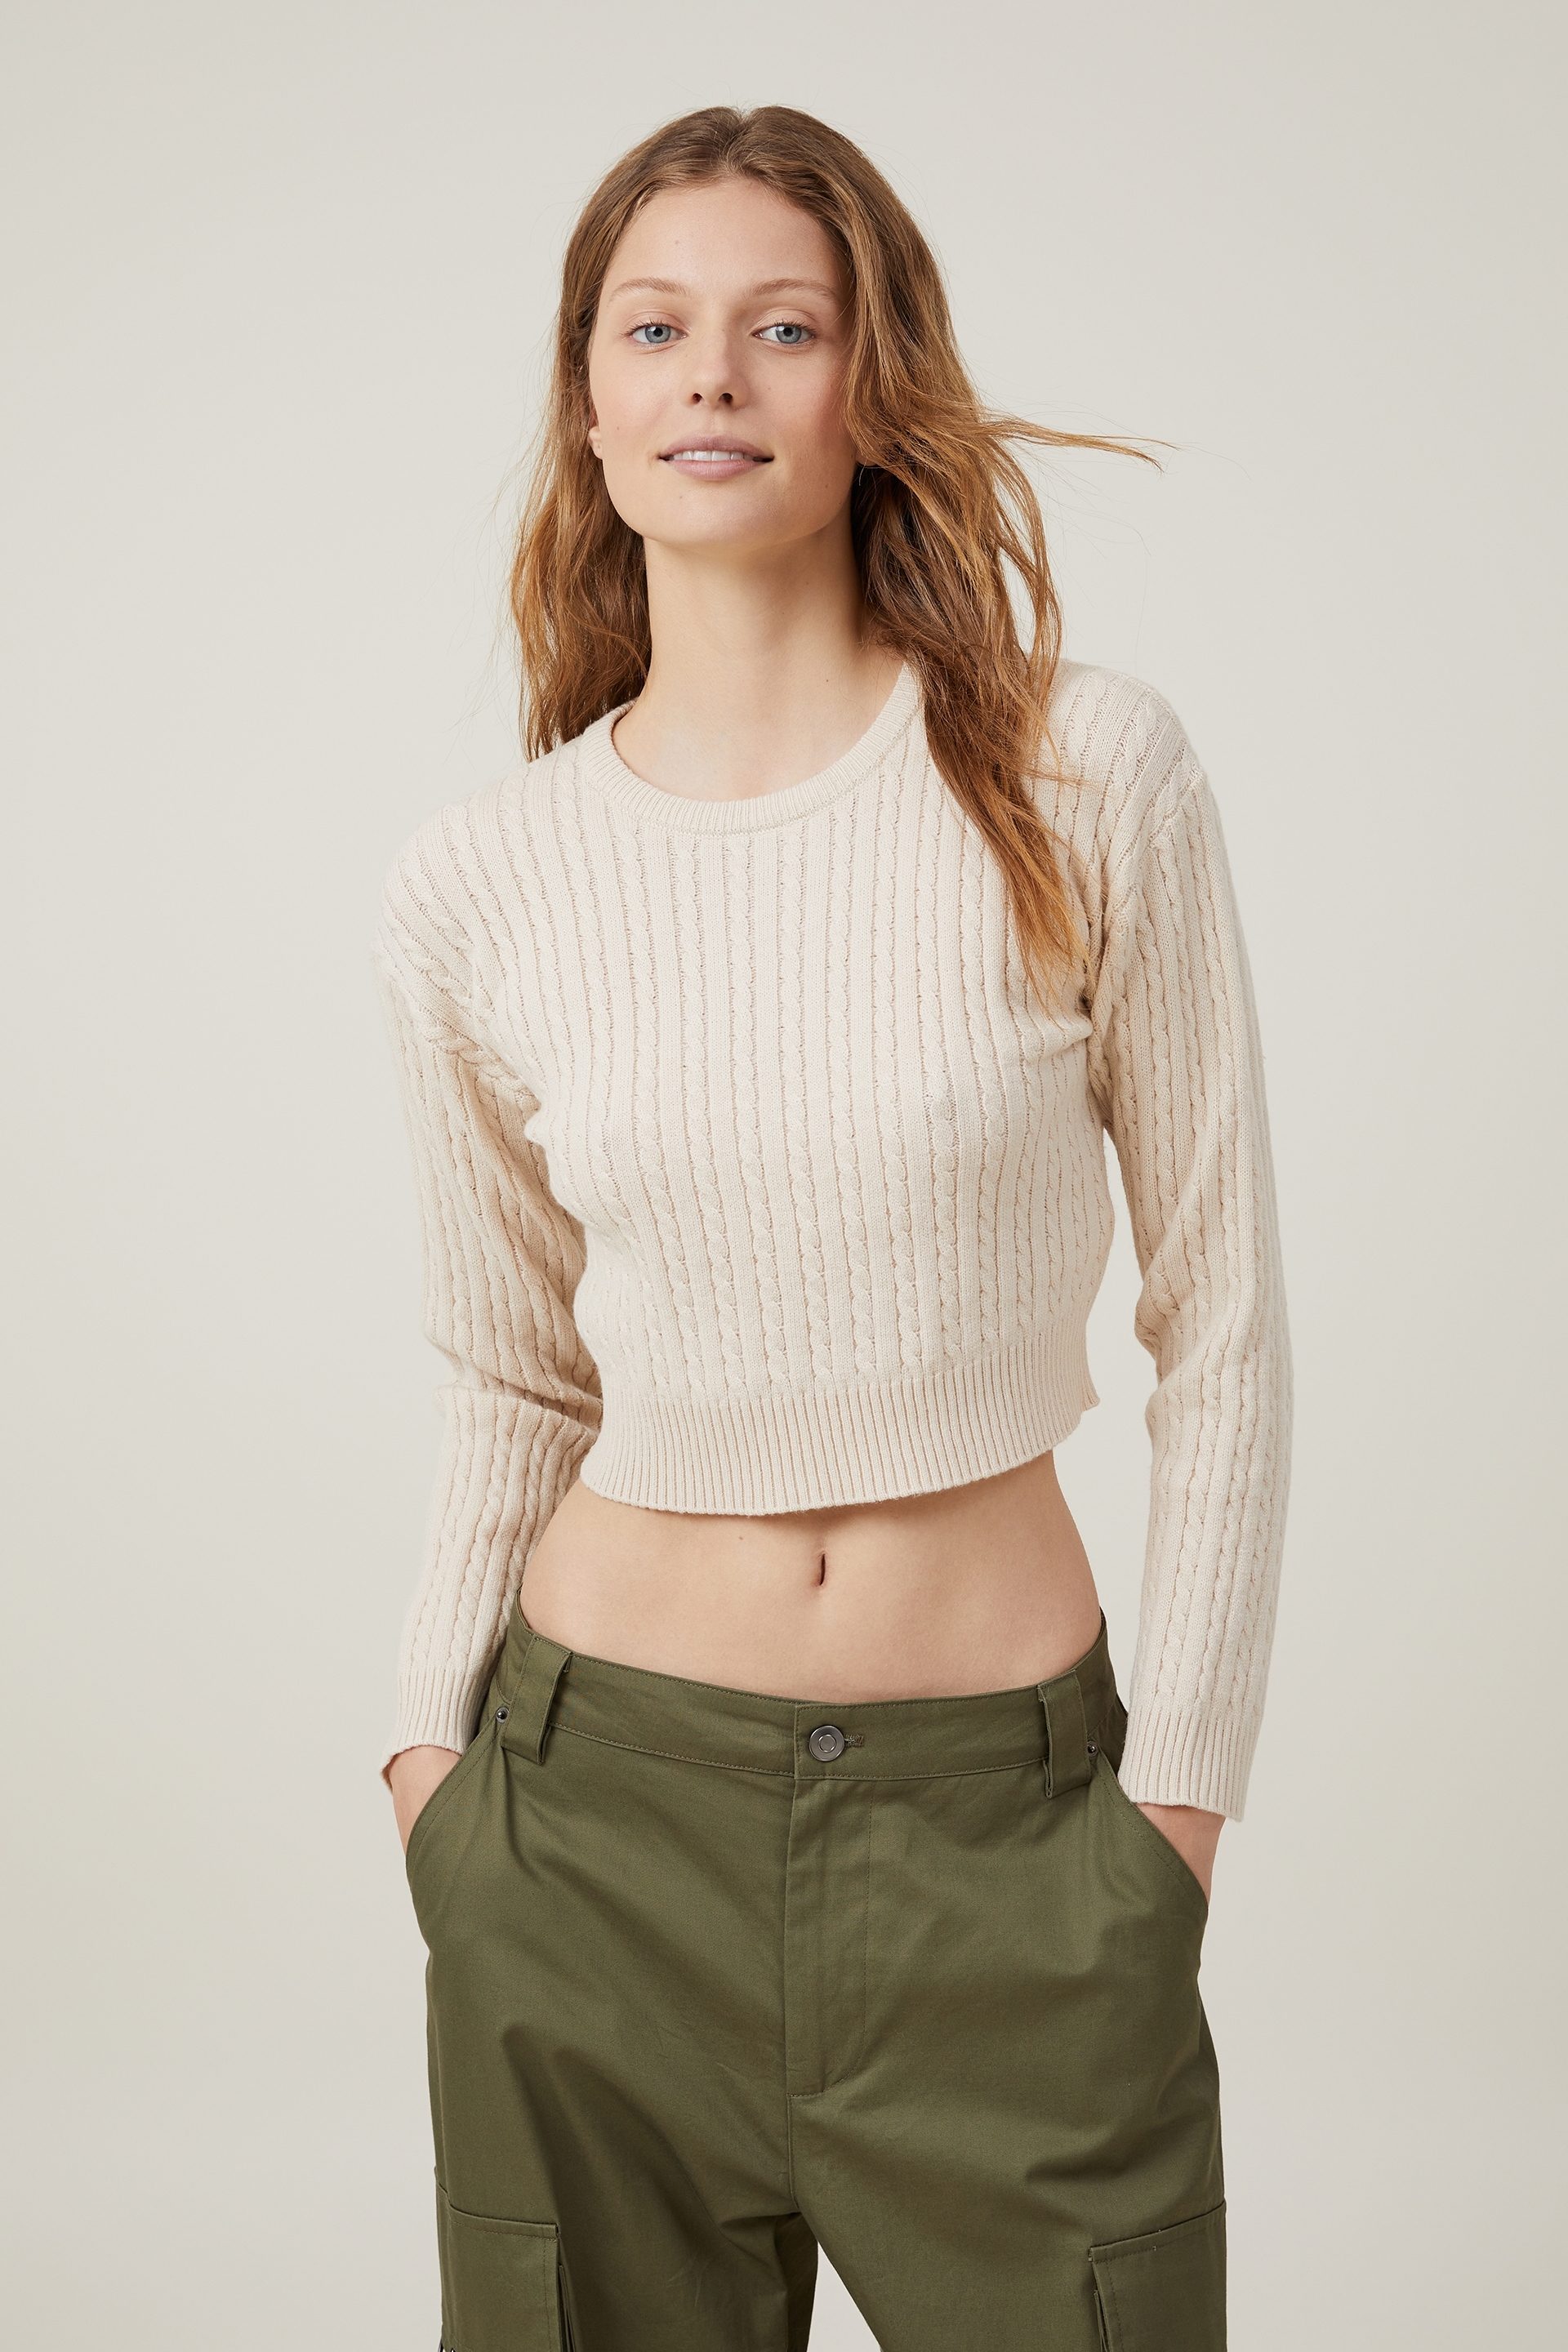 Cotton On Women - Everfine Cable Crew Neck Pullover - Stone